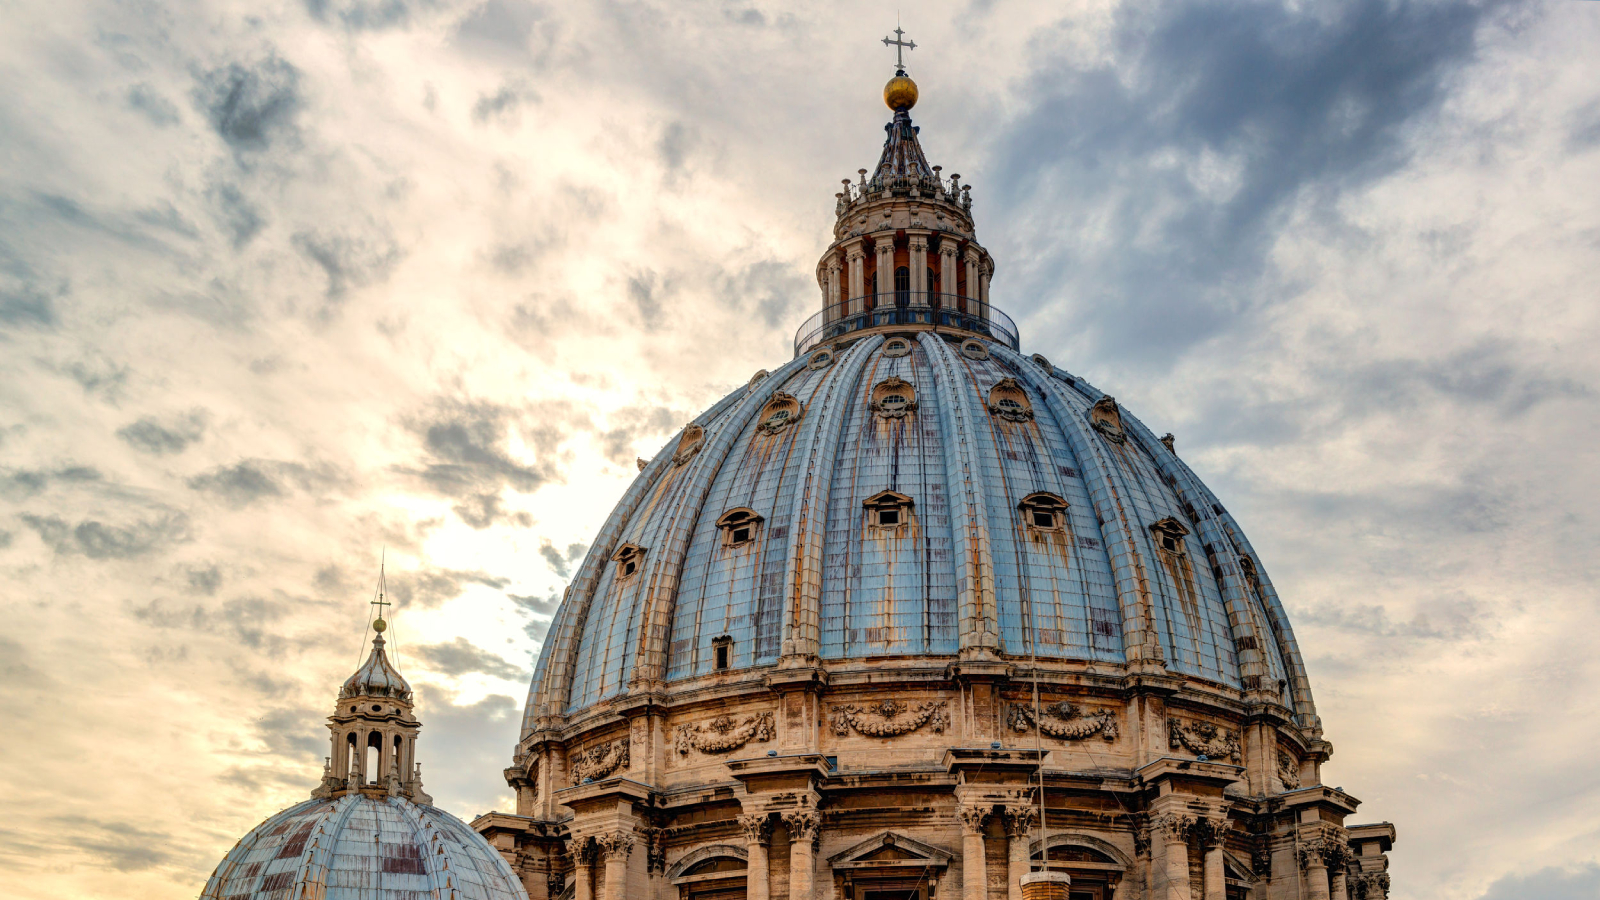 St. Peter’s Basilica self-guided Virtual Experience: The Holiest Site of Rome